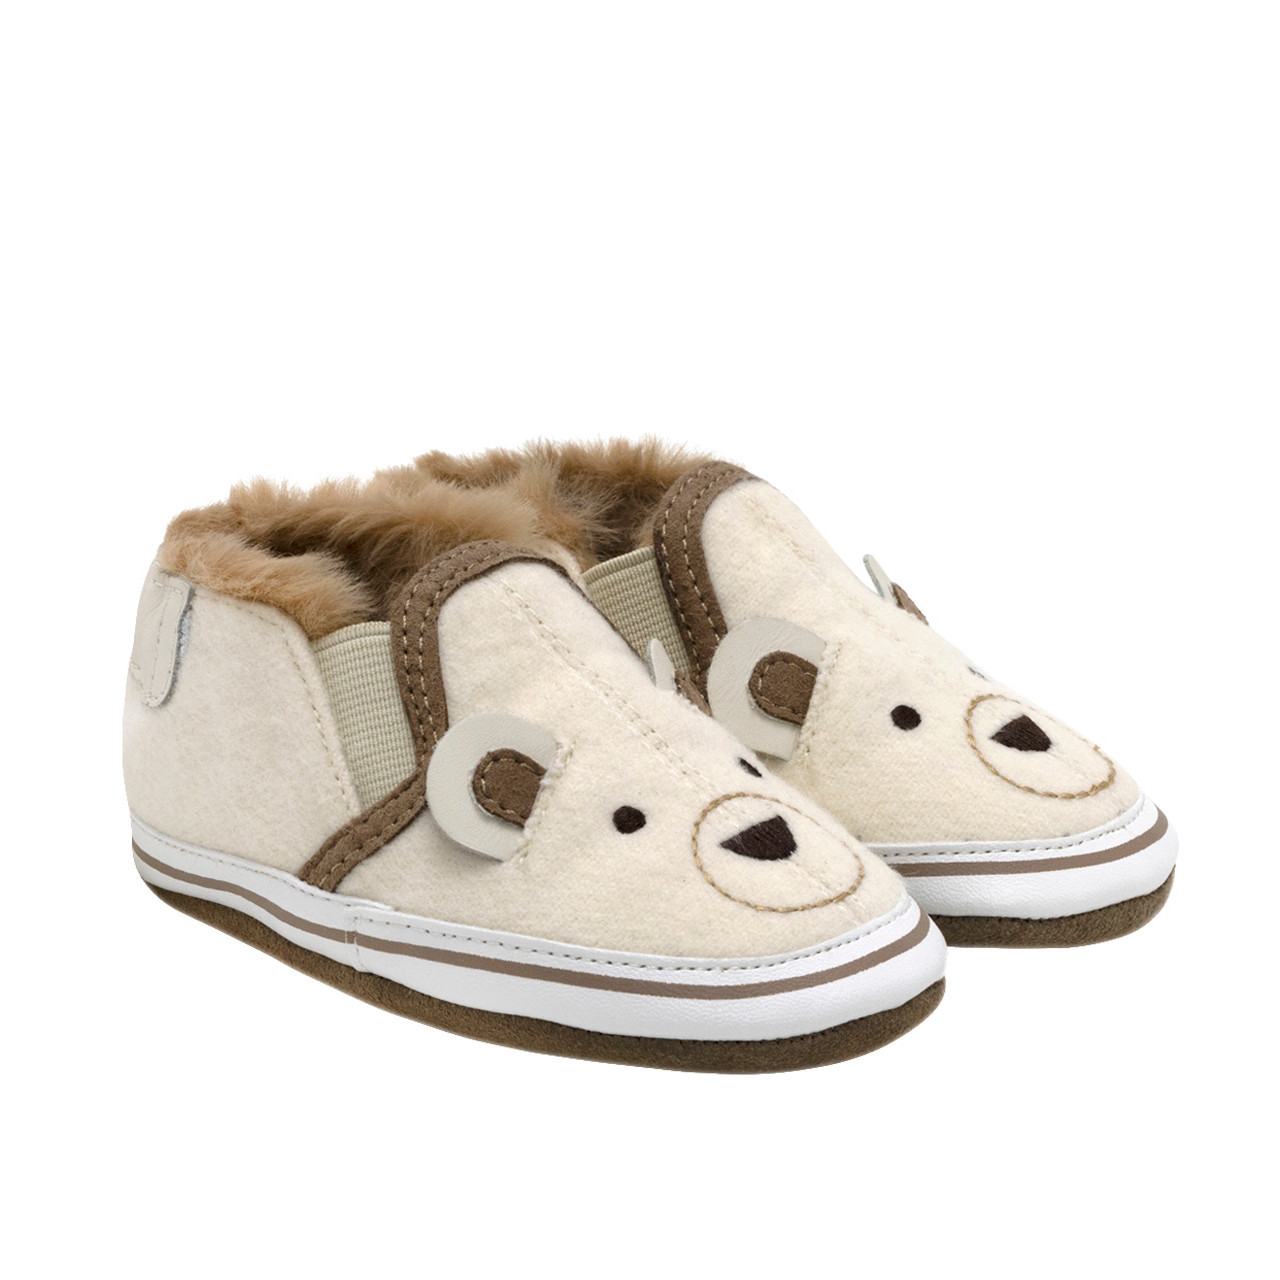 ROBEEZ BABY BEAR IVORY - The Shoppes at Steve's Ace Home & Garden